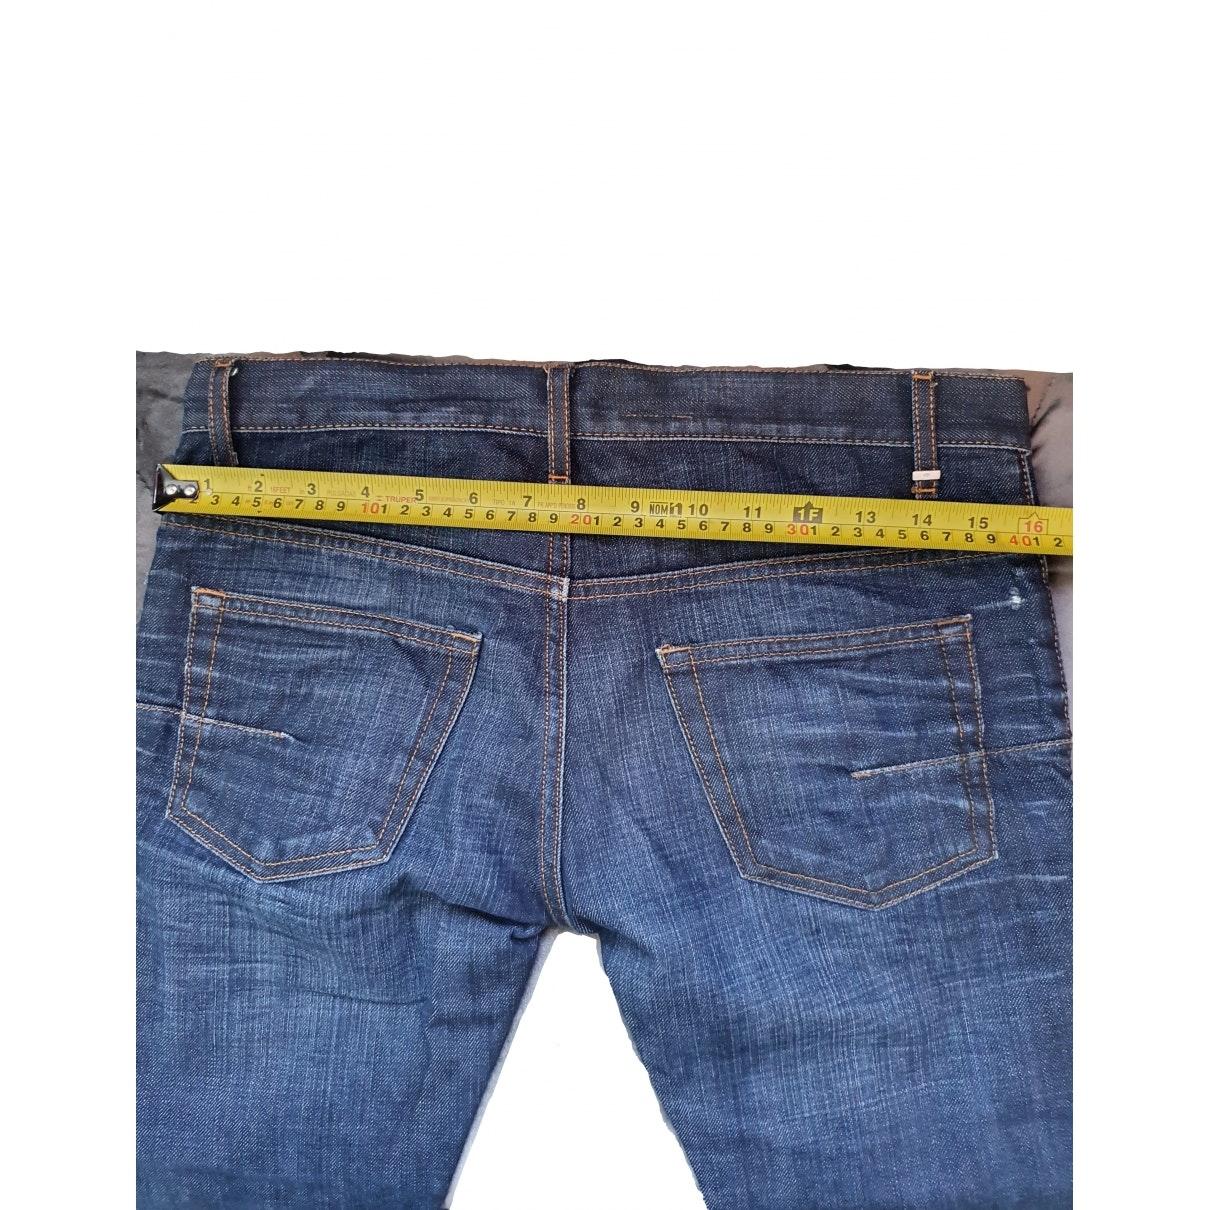 Dior Navy Cotton Jeans in Blue for Men - Lyst